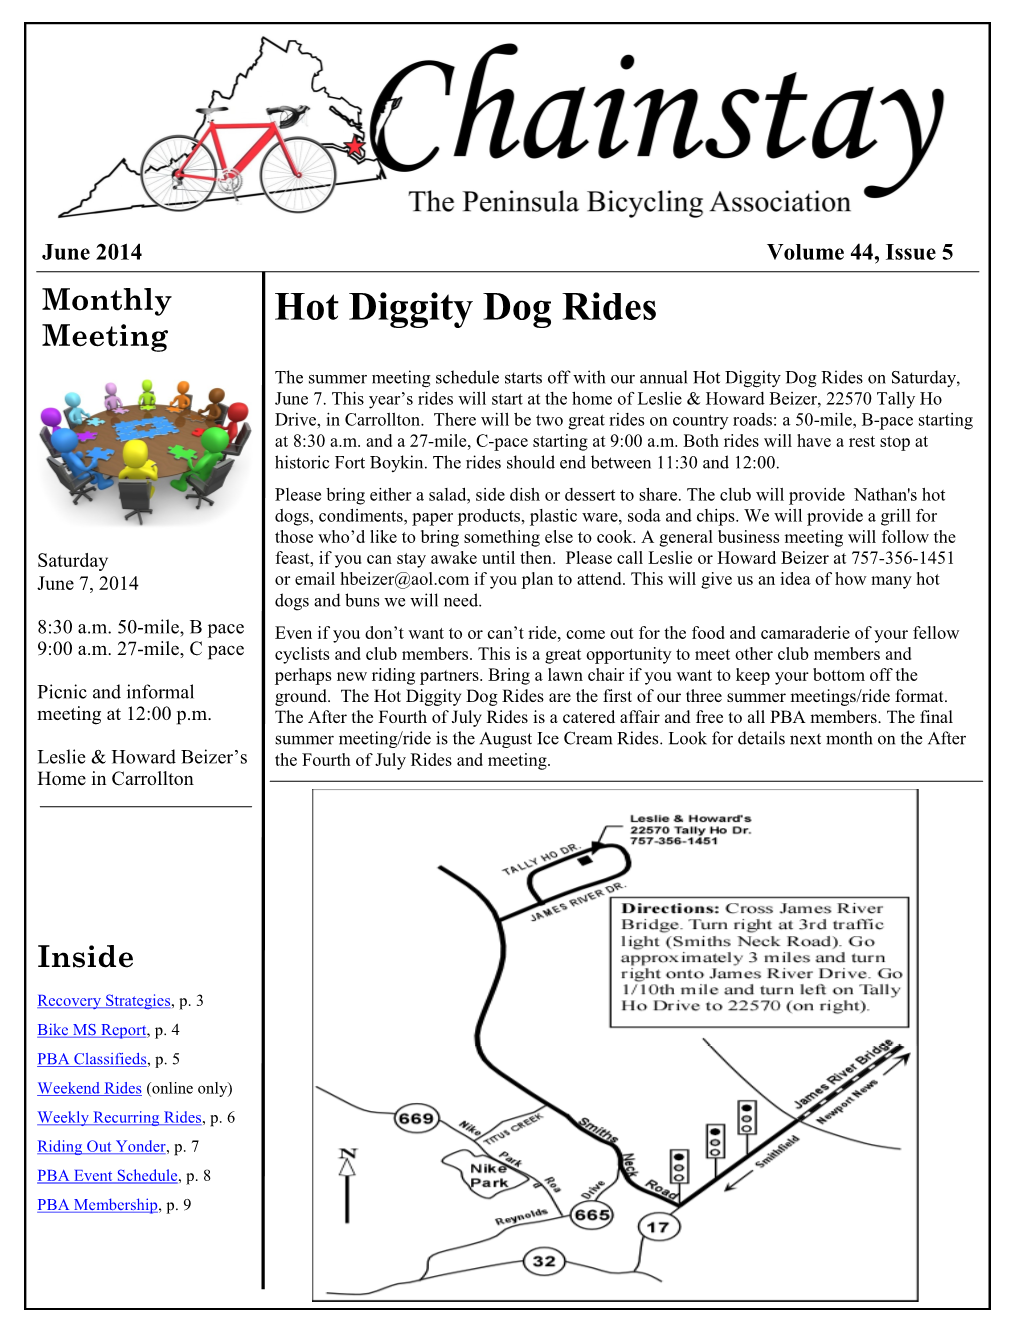 Hot Diggity Dog Rides Meeting the Summer Meeting Schedule Starts Off with Our Annual Hot Diggity Dog Rides on Saturday, June 7